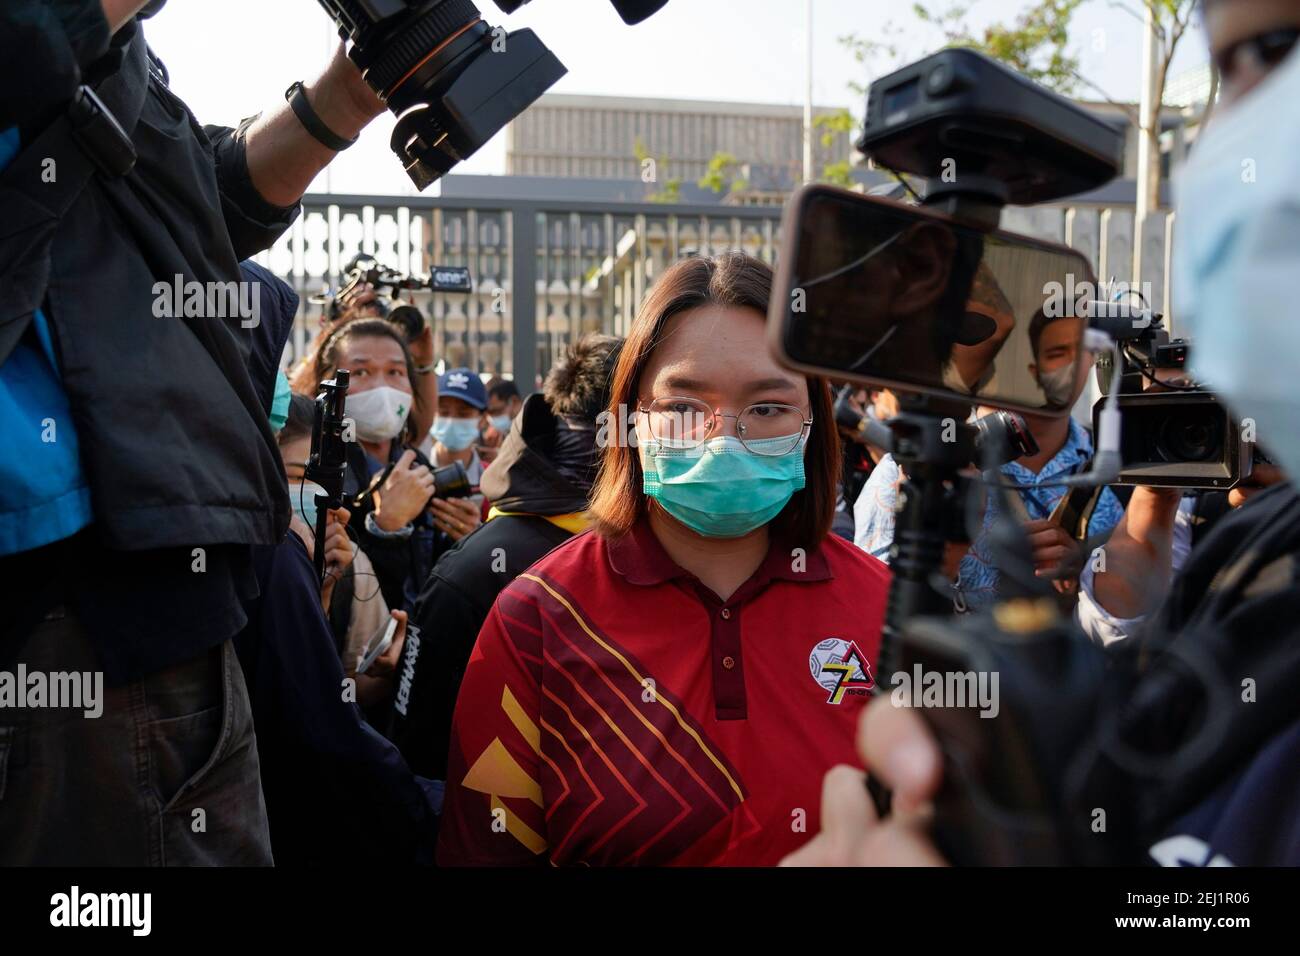 Thai pro-democracy leader Panusaya Sithijirawattanakul seen leaving the parliament building after negotiating with the police about how long the protest will take.Pro-democracy protesters demonstrate demanding the prime minister to resign, reforms the monarchy and release every prisoner under article 112 or lesse majeste law outside the Thai parliament building in Bangkok. Stock Photo